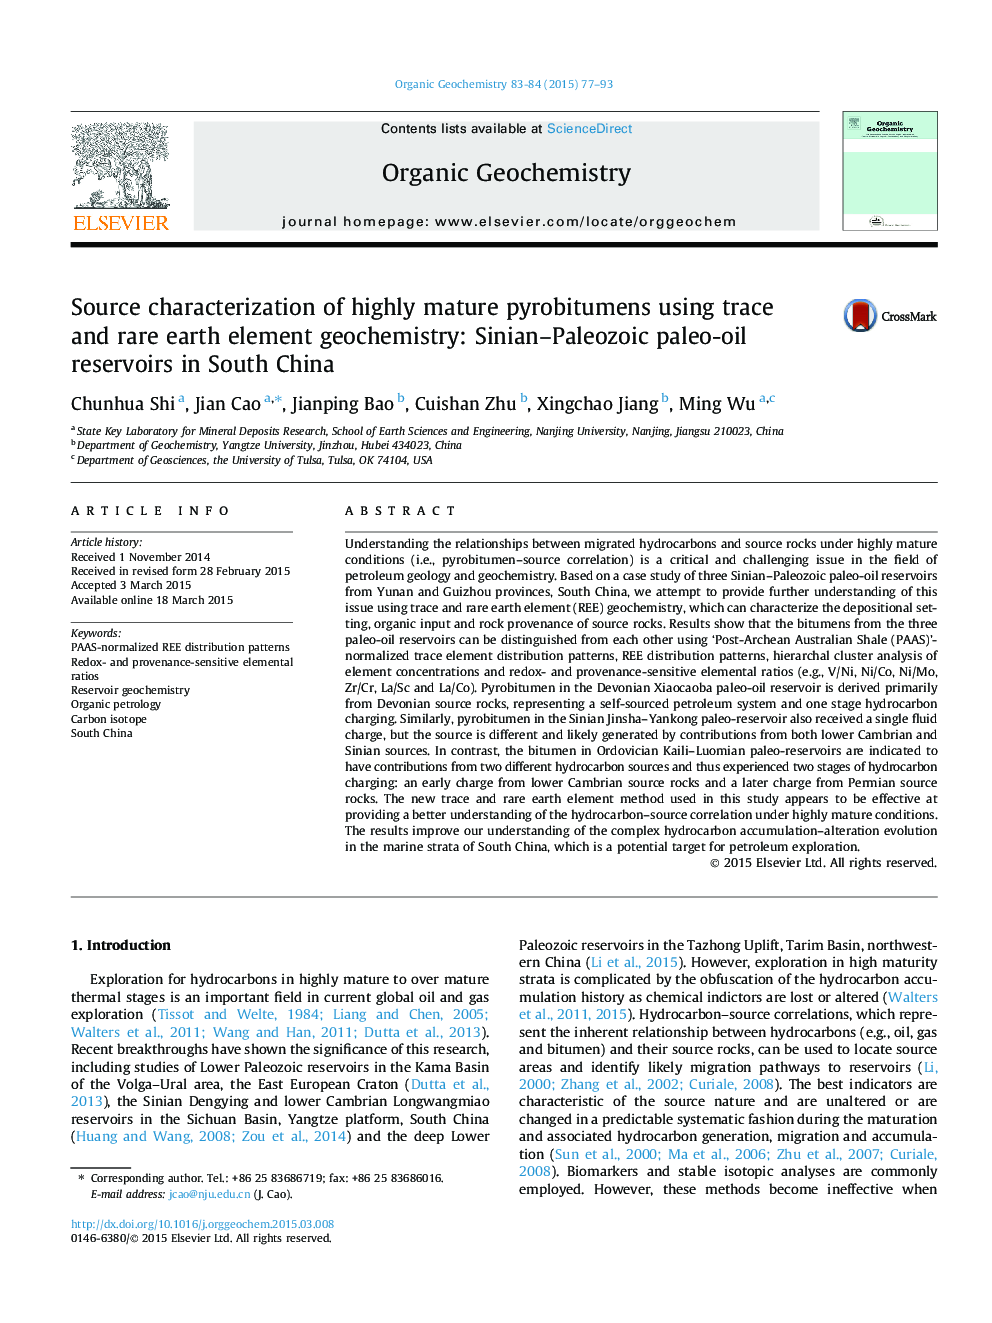 Source characterization of highly mature pyrobitumens using trace and rare earth element geochemistry: Sinian-Paleozoic paleo-oil reservoirs in South China